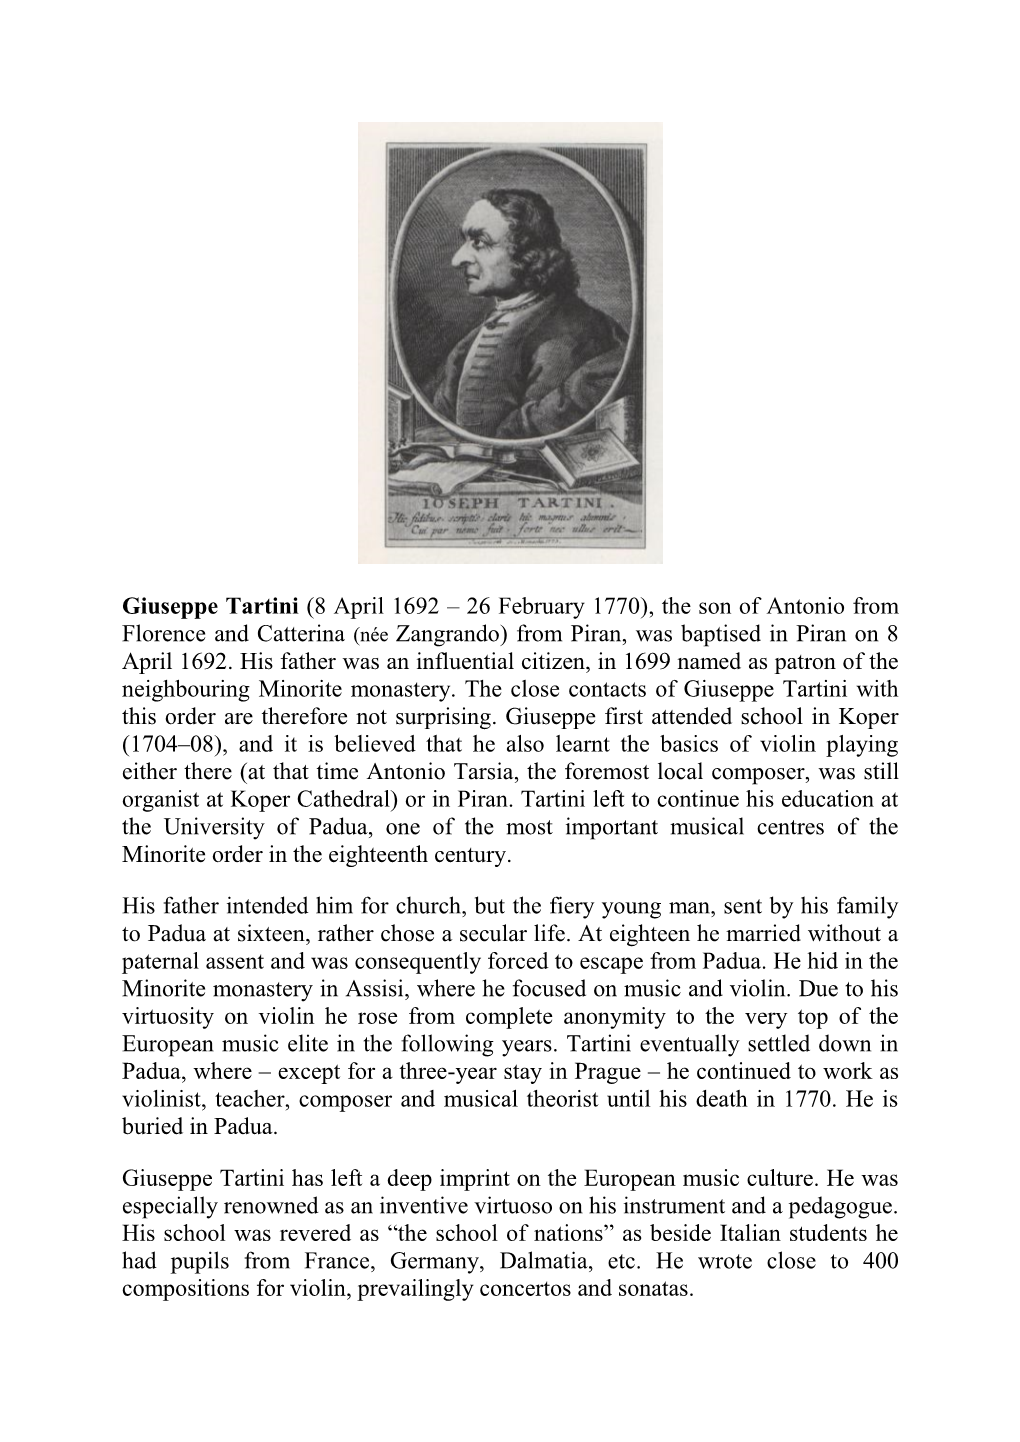 Giuseppe Tartini (8 April 1692 – 26 February 1770), the Son of Antonio from Florence and Catterina (Née Zangrando) from Piran, Was Baptised in Piran on 8 April 1692